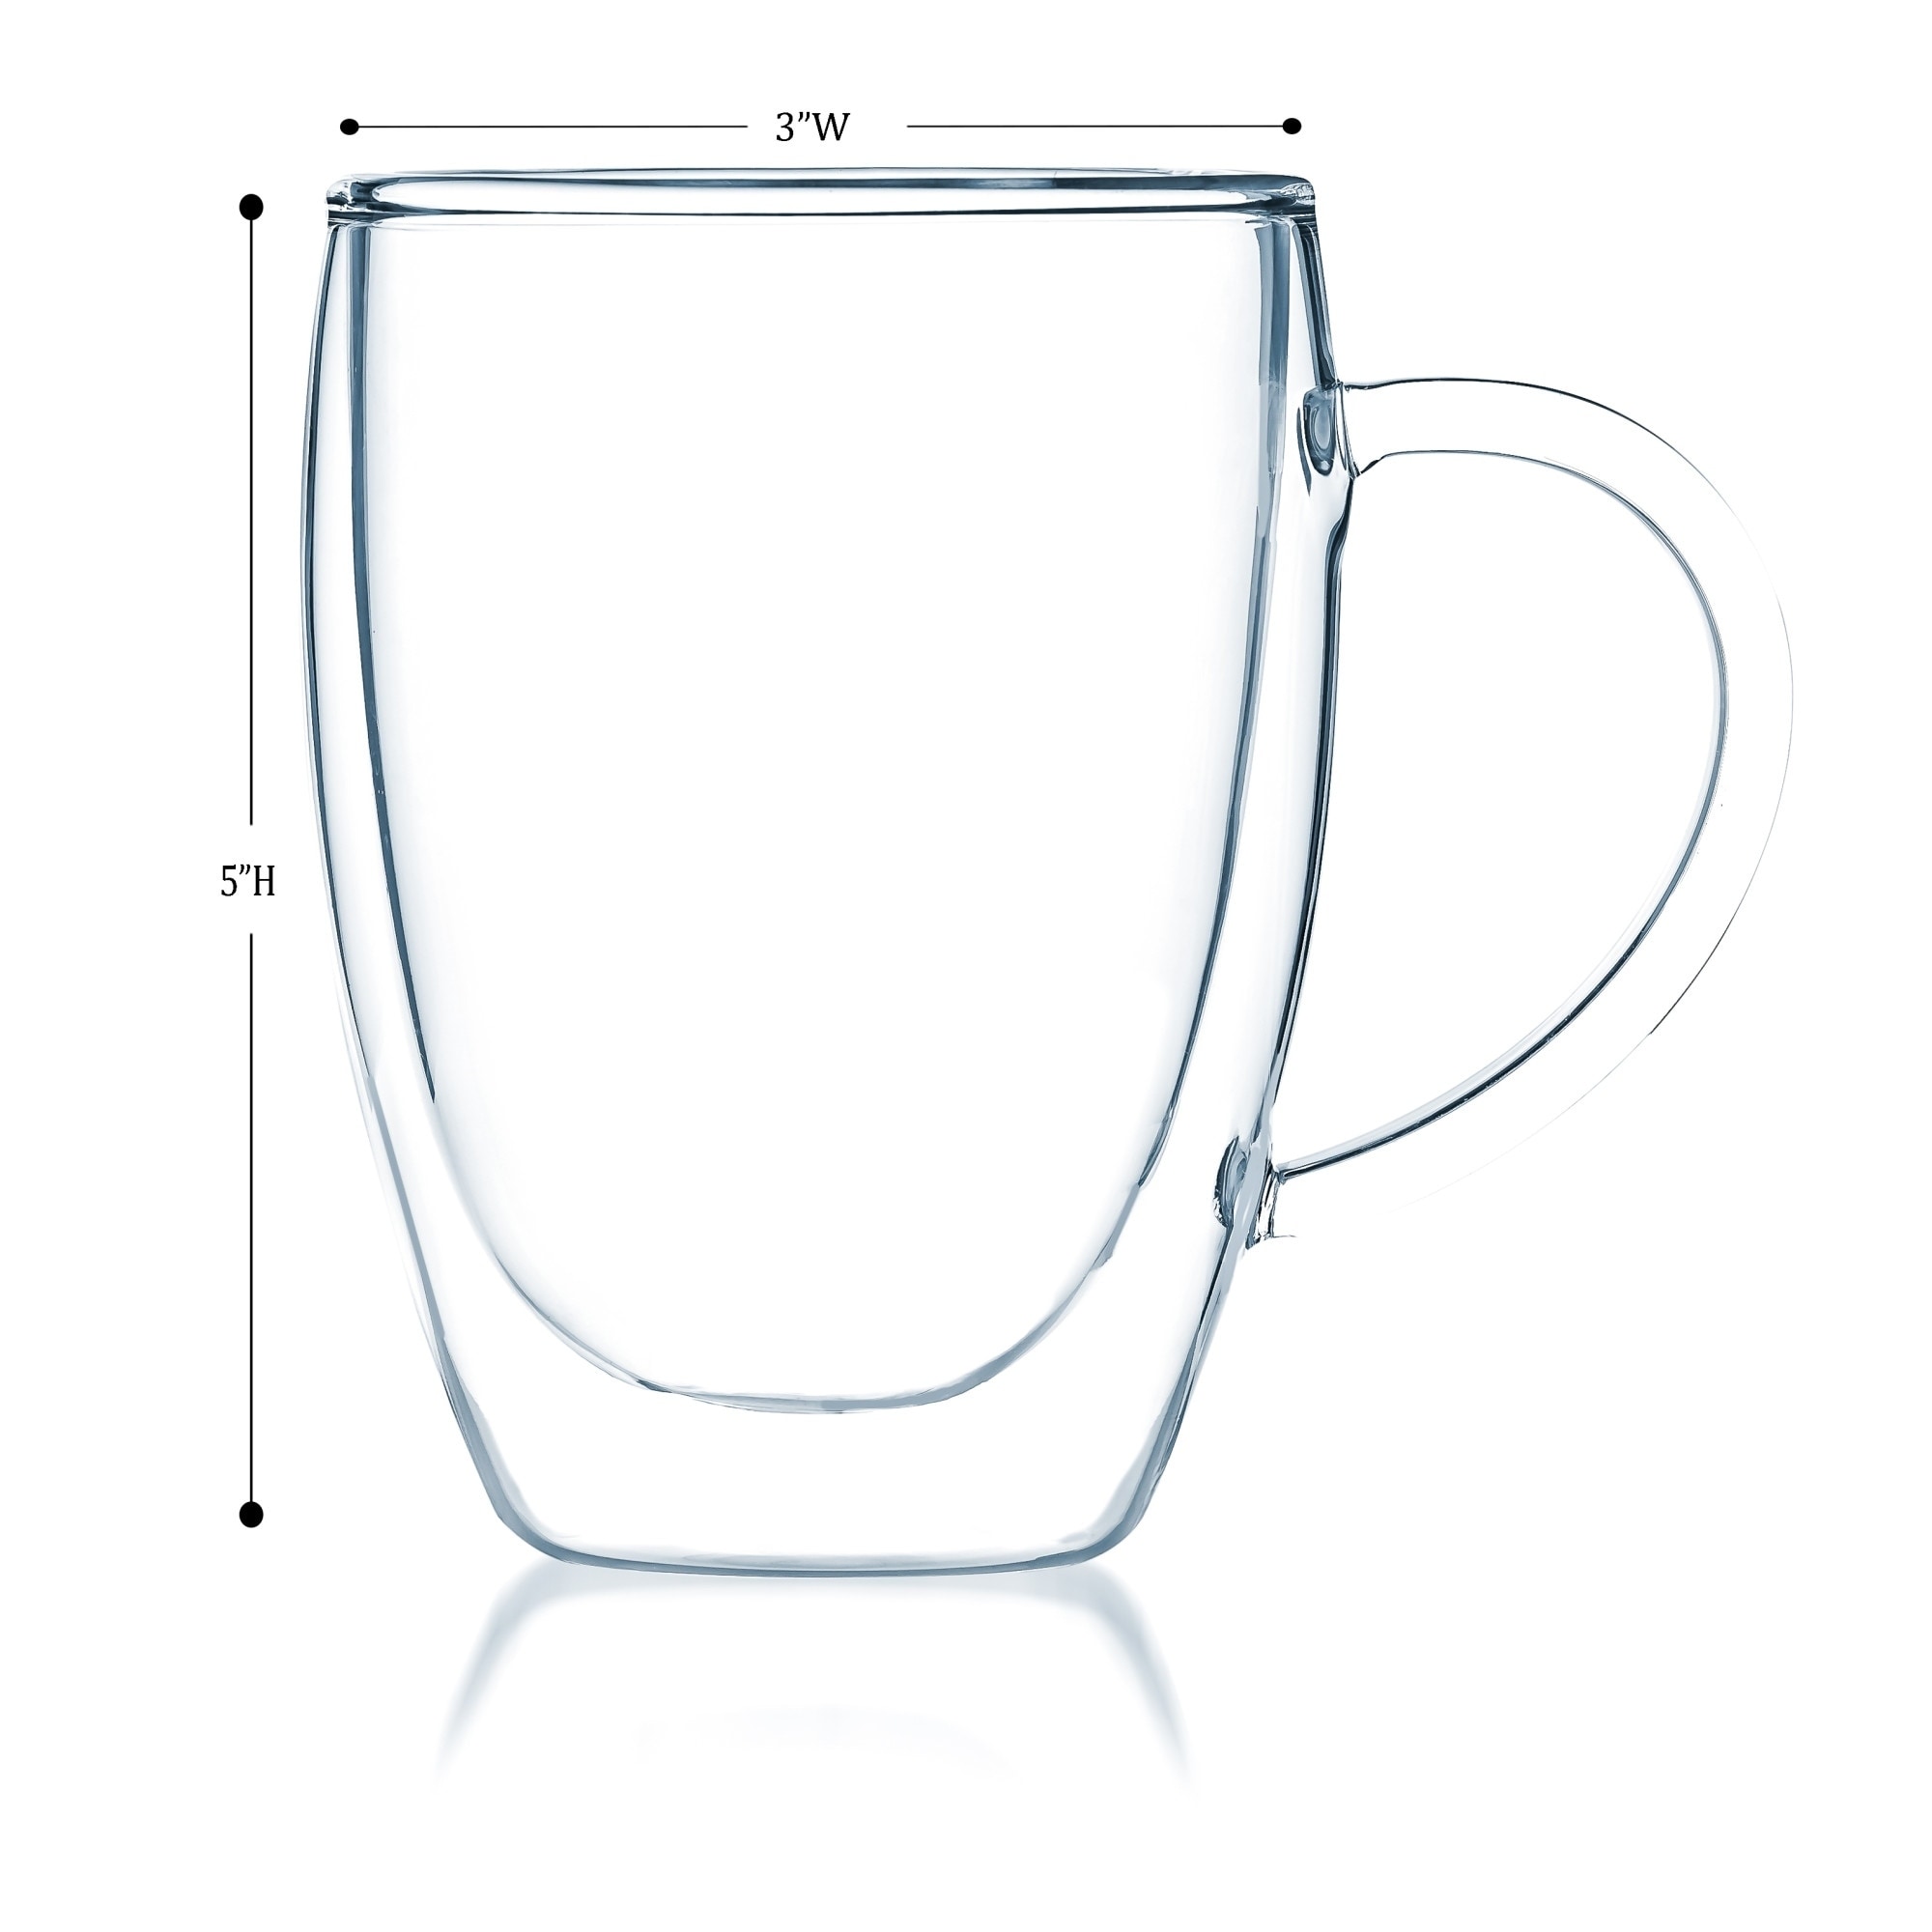 https://ak1.ostkcdn.com/images/products/14427905/JavaFly-Clear-Glass-12-ounce-Double-walled-Thermo-Bistro-Mug-with-Handle-Set-of-2-74dbda9c-0fc8-47a7-8b6a-5a03d884dc5e.jpg